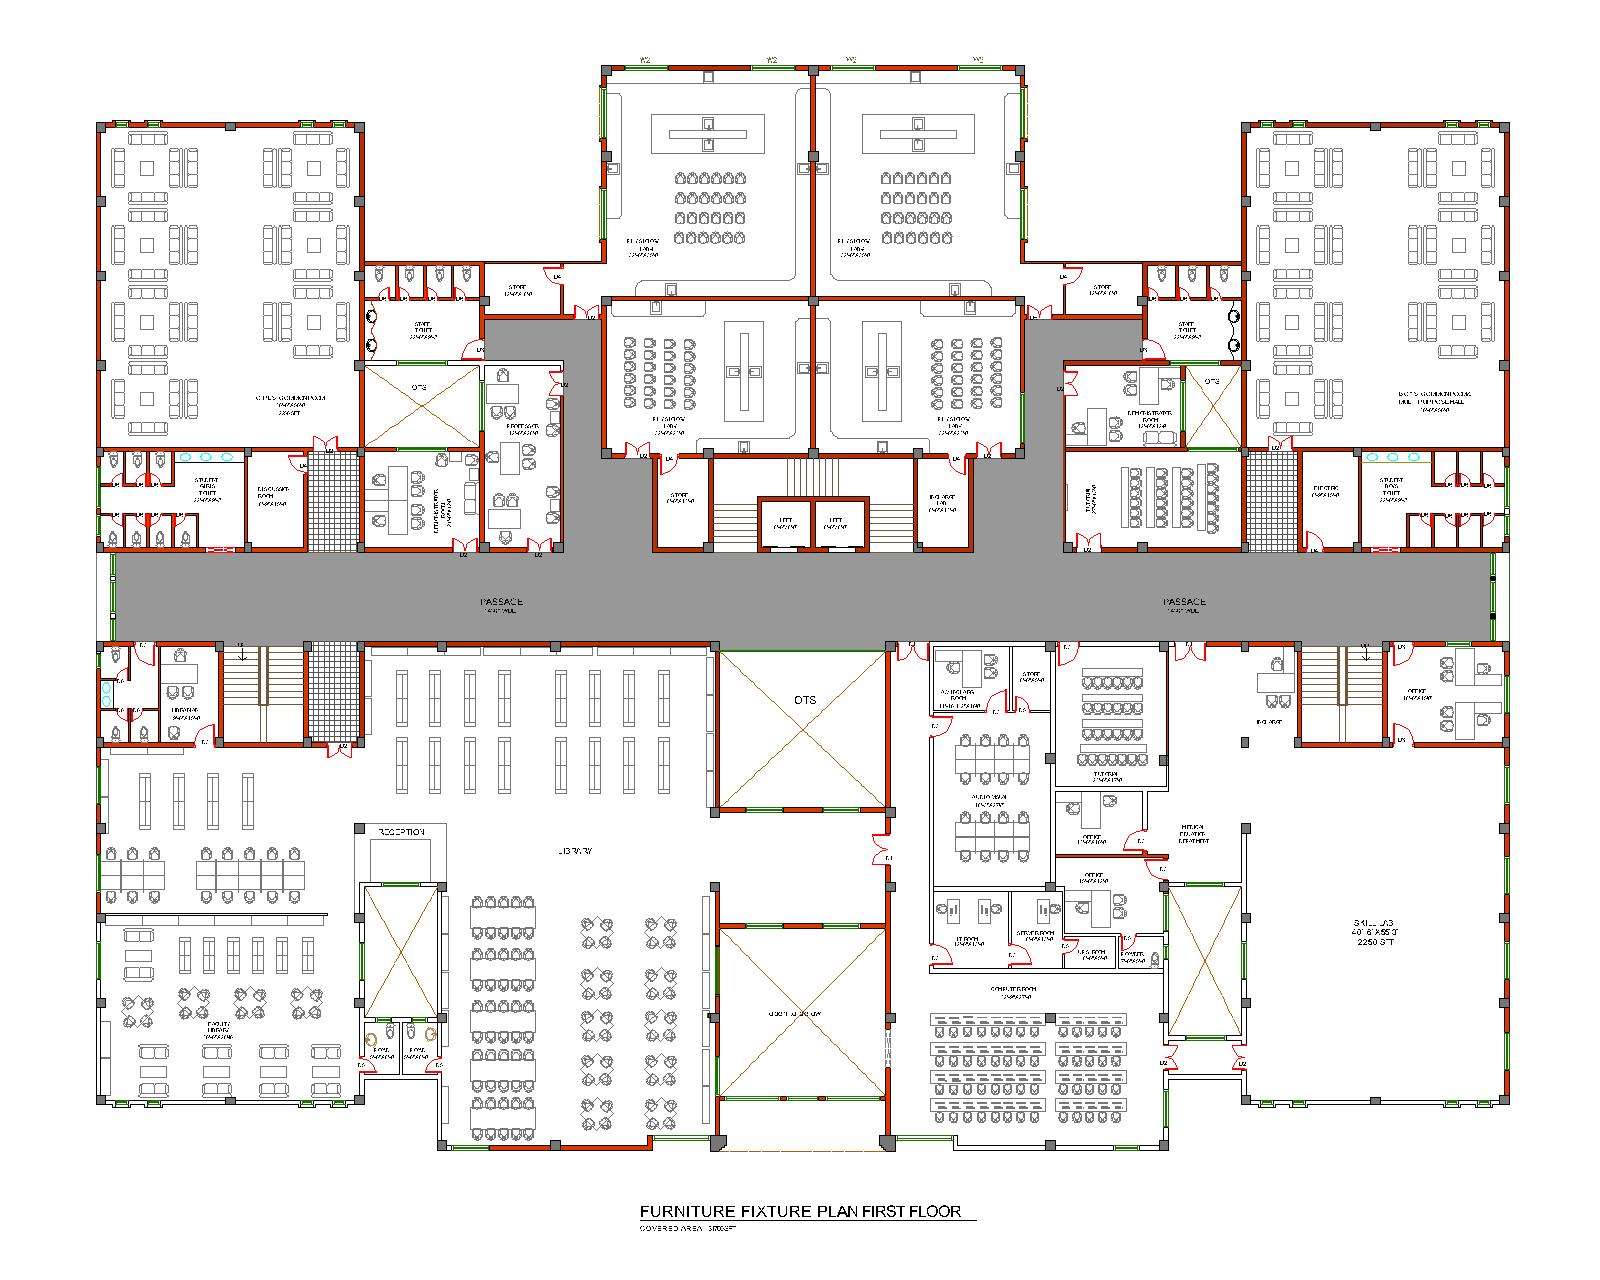 Medical Colleges First Floor plan Cadbull